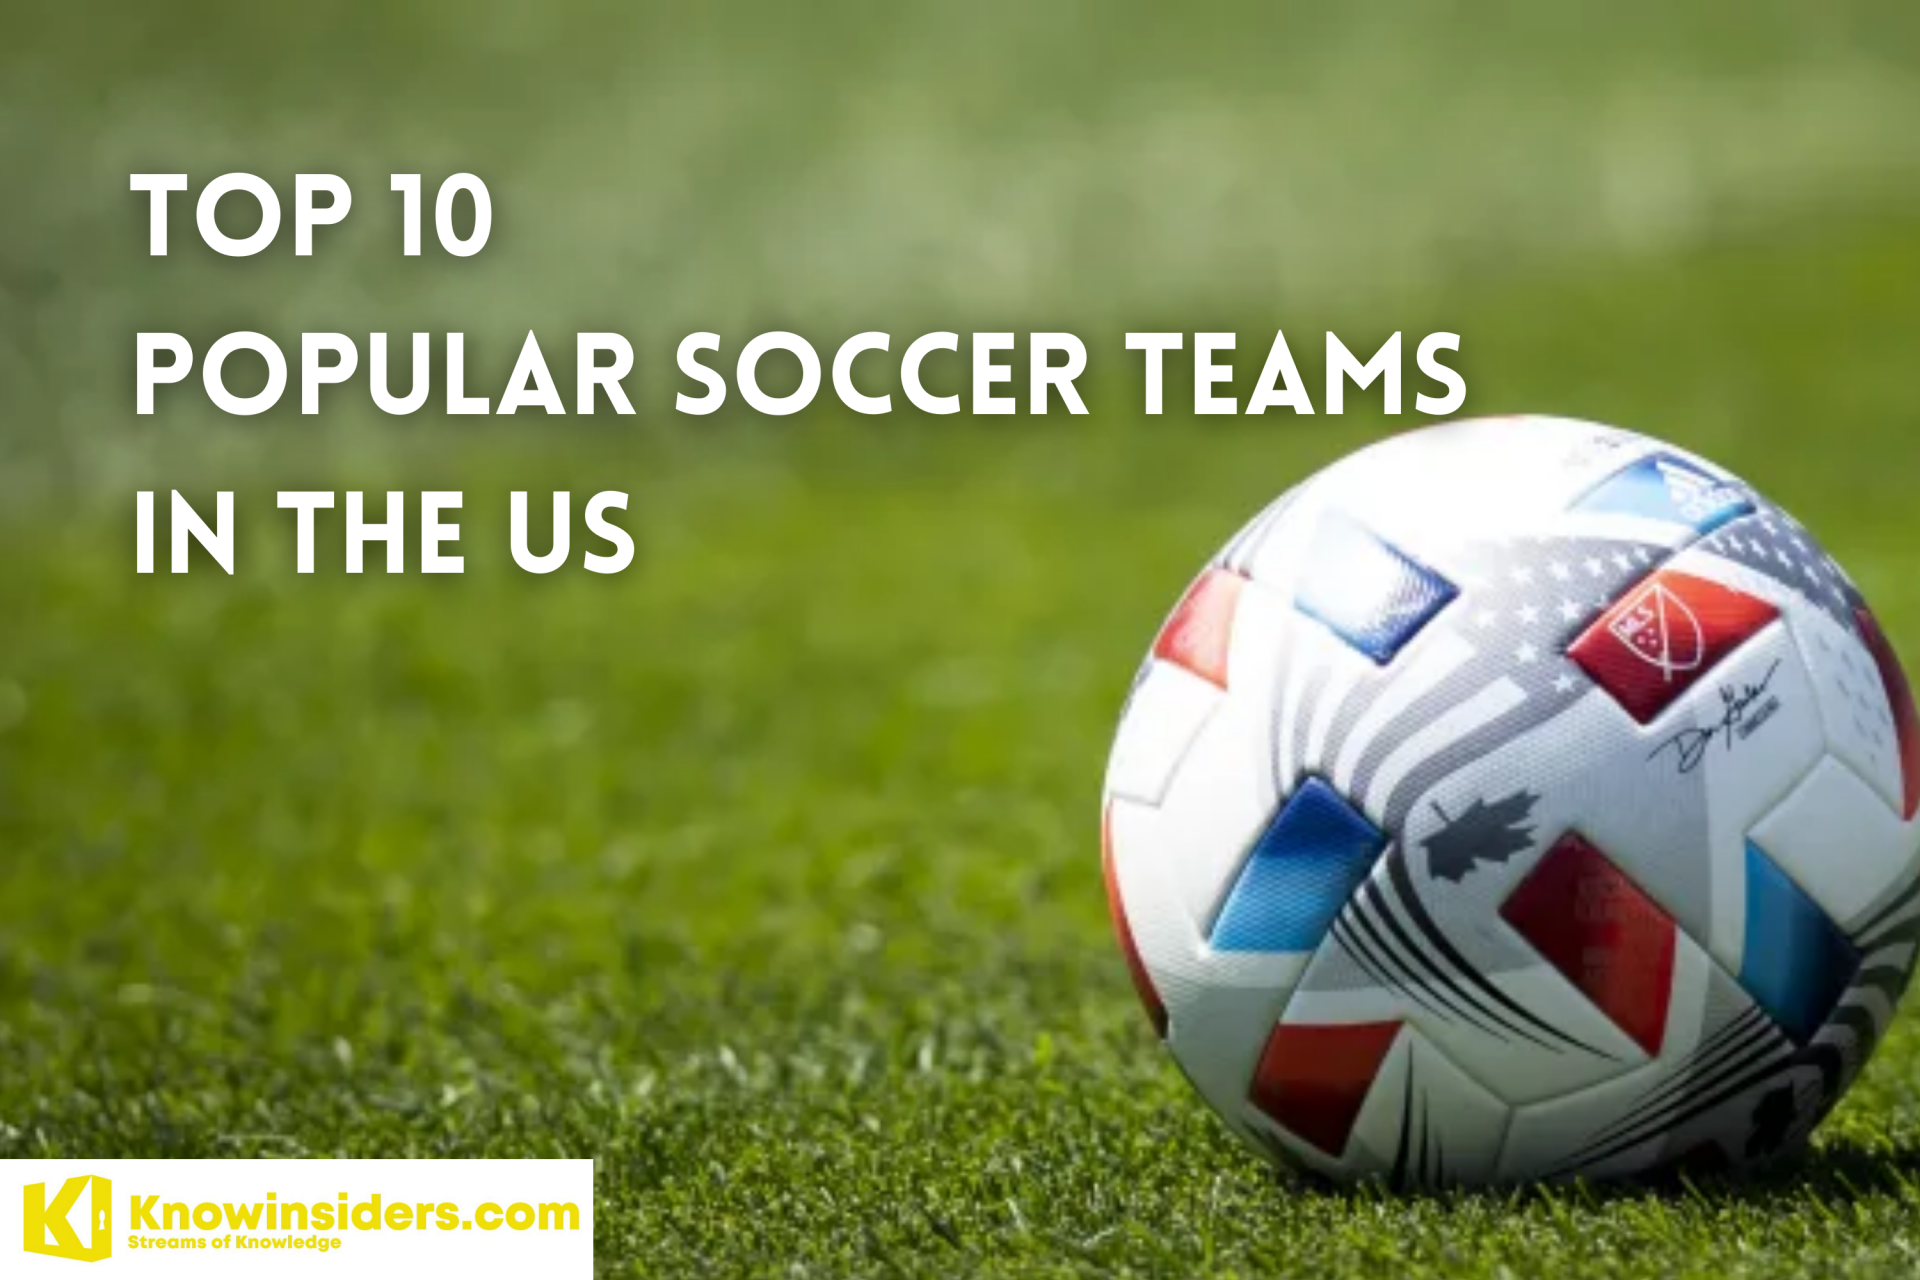 Top 10 Most Popular Soccer Teams in the US